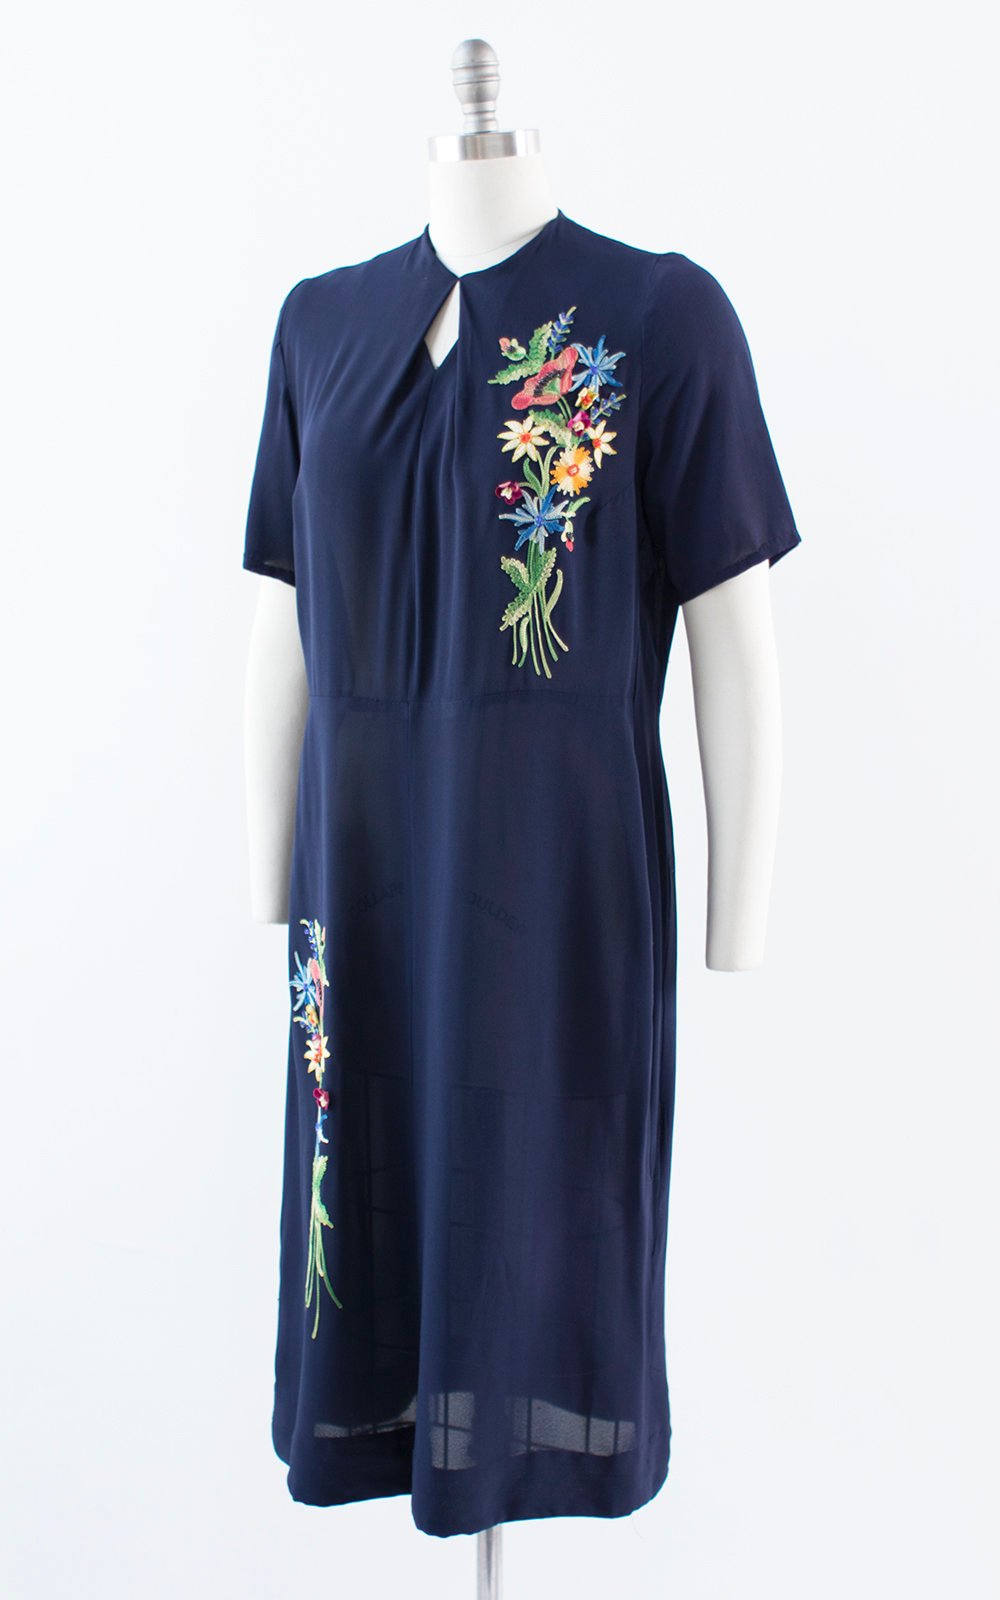 Vintage 1940s Dress | 40s Floral Chainstitch Embroidered Dark Navy Blue Rayon Cocktail Sheath Dress (large/x-large)